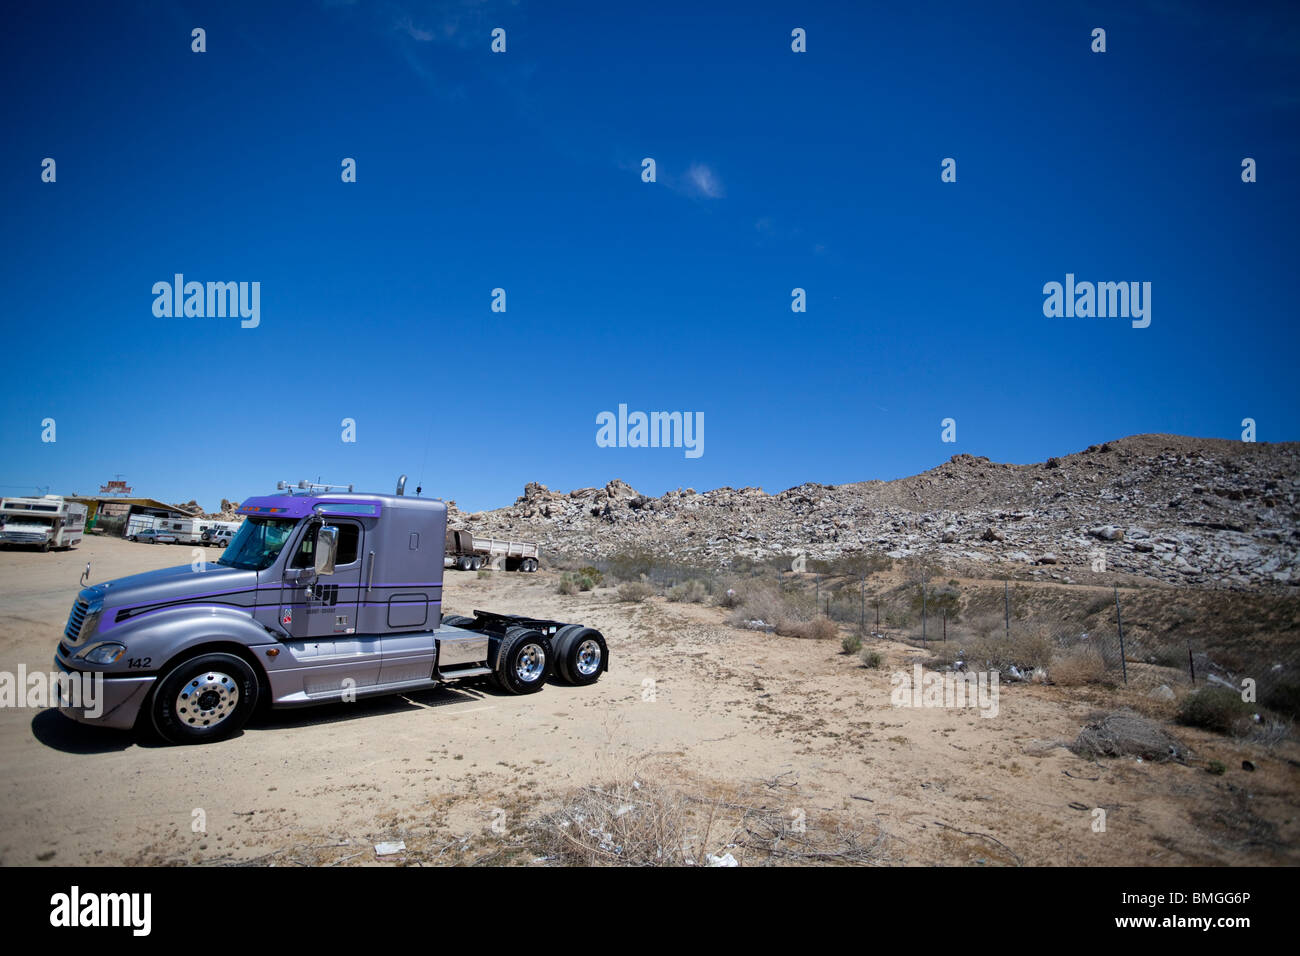 A truck parked in the Mojave Desert, Southern California, USA, United States, Stock Photo